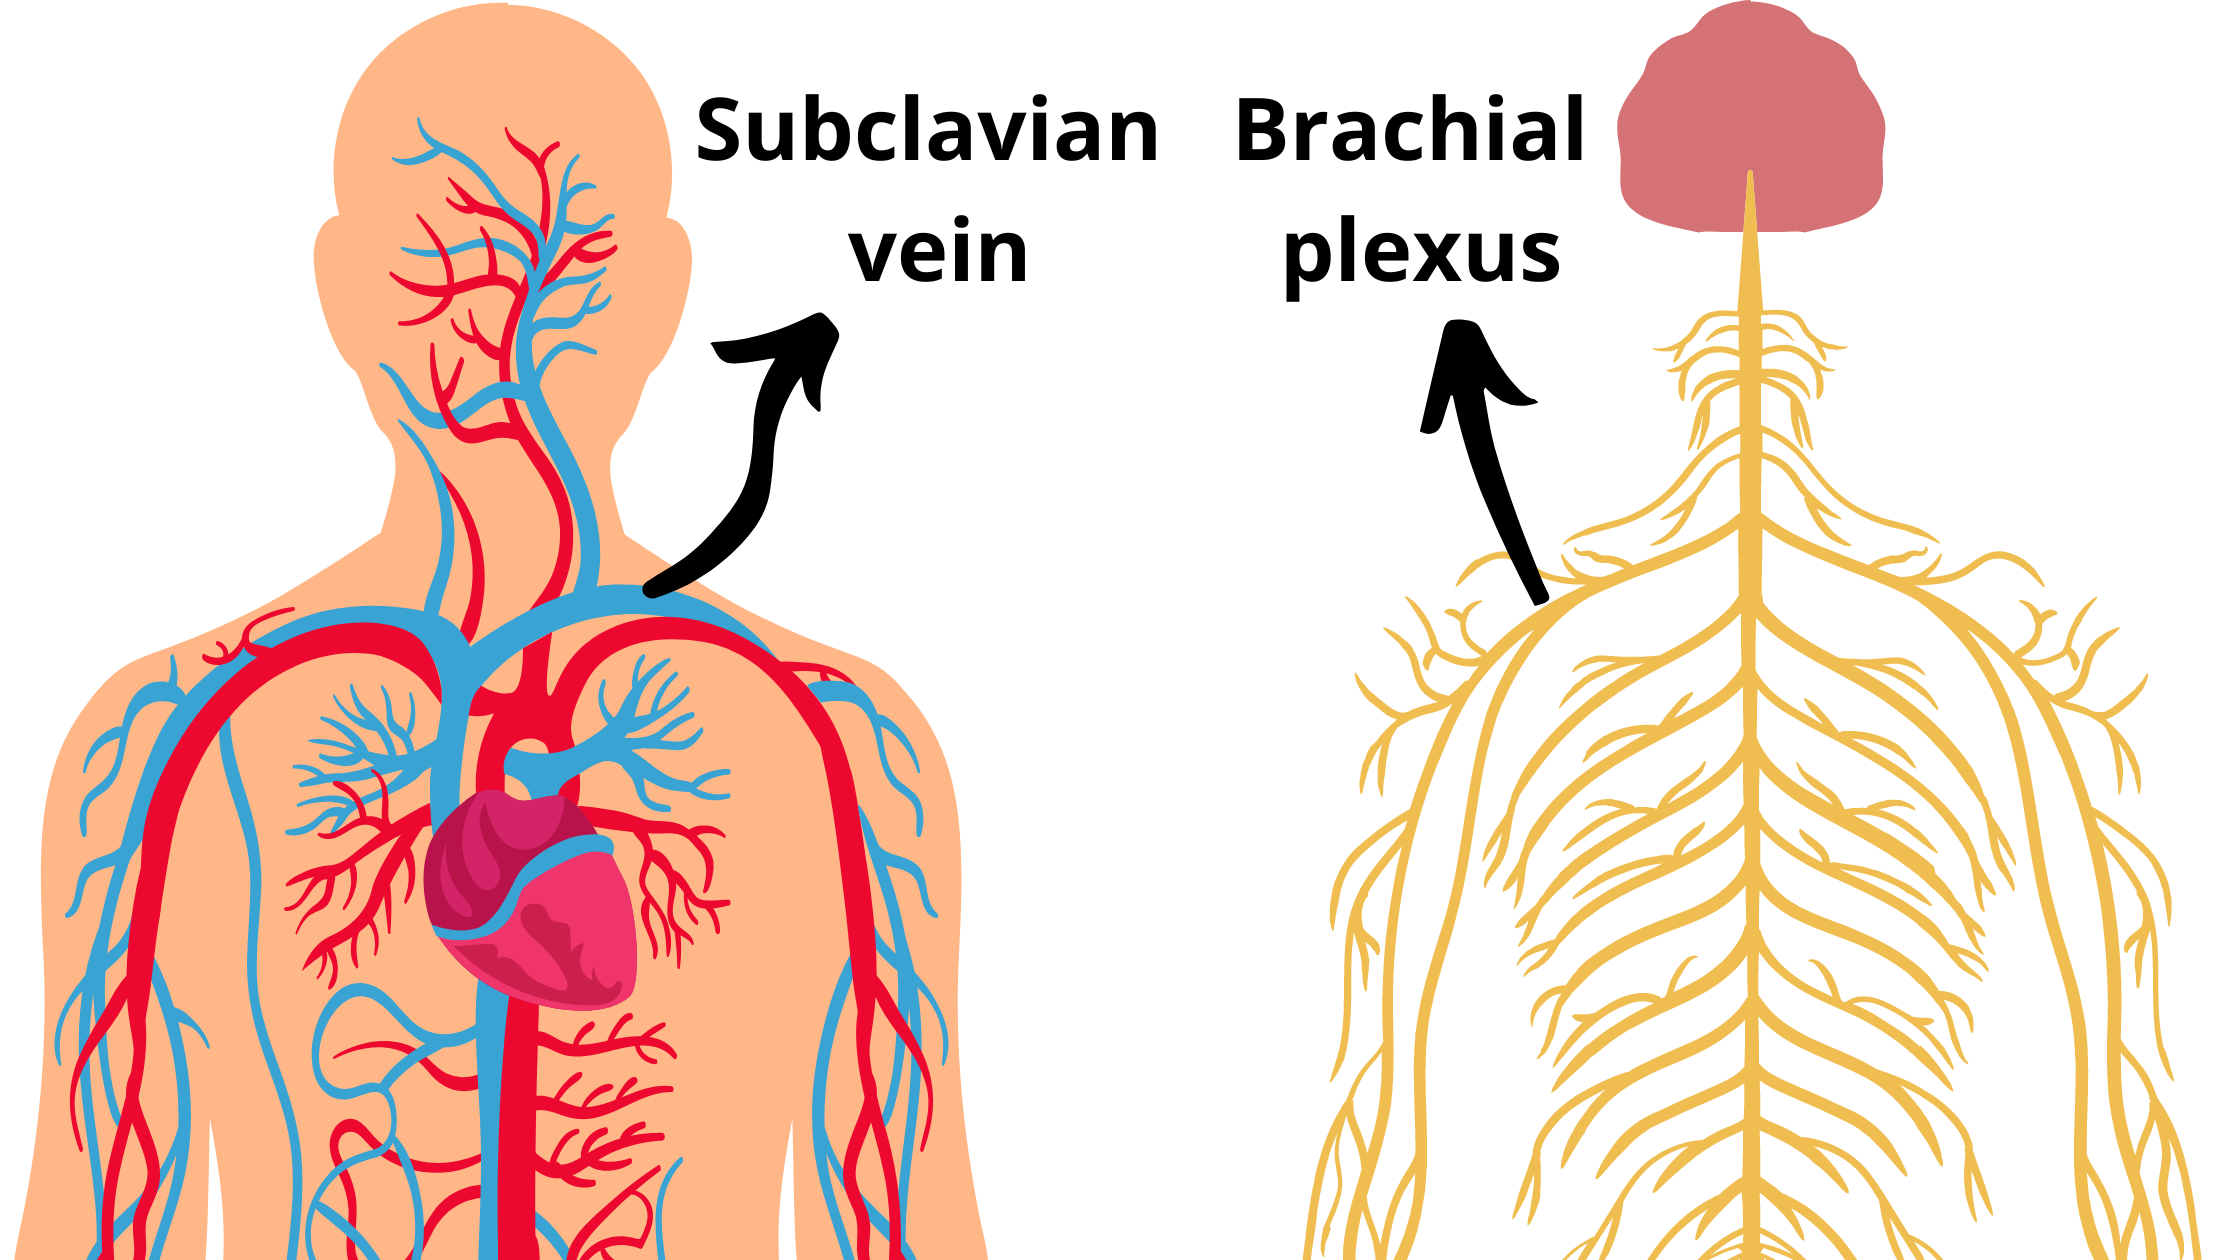 Anatomy-of-the-subclavian-vein-and-brachial-plexus-in-clavicle-fractures